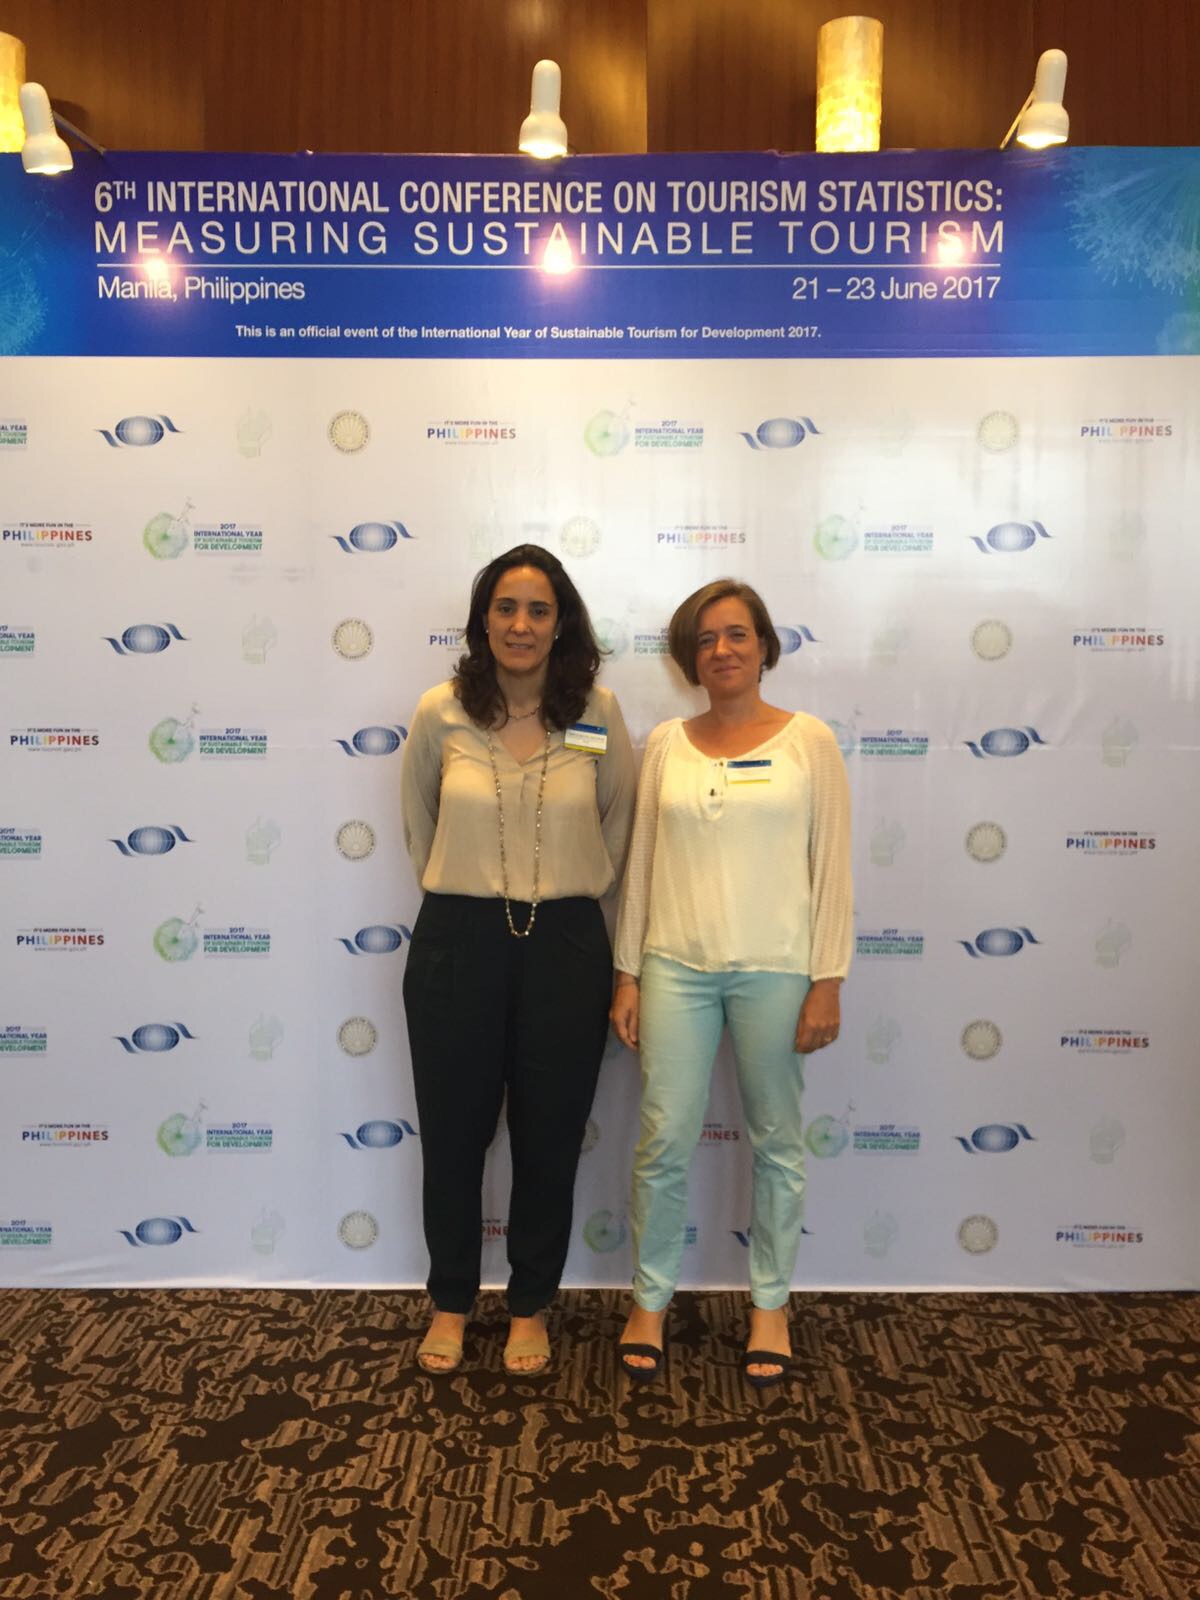 NECSTouR presents at the 6th UNWTO International Conference on Tourism Statistics